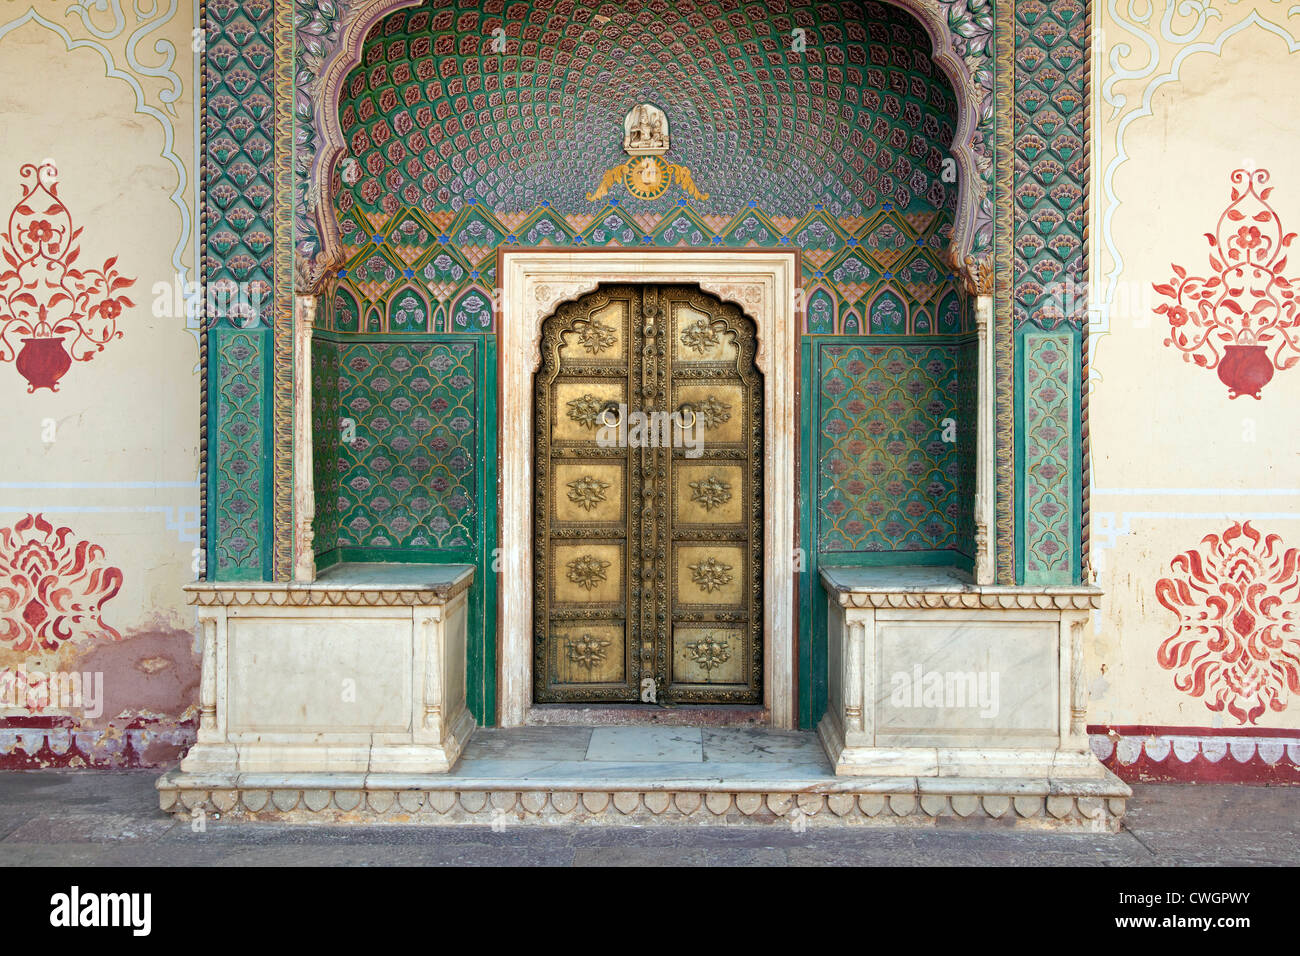 Rose gate at the City Palace complex, Jaipur, Rajasthan, India Stock Photo